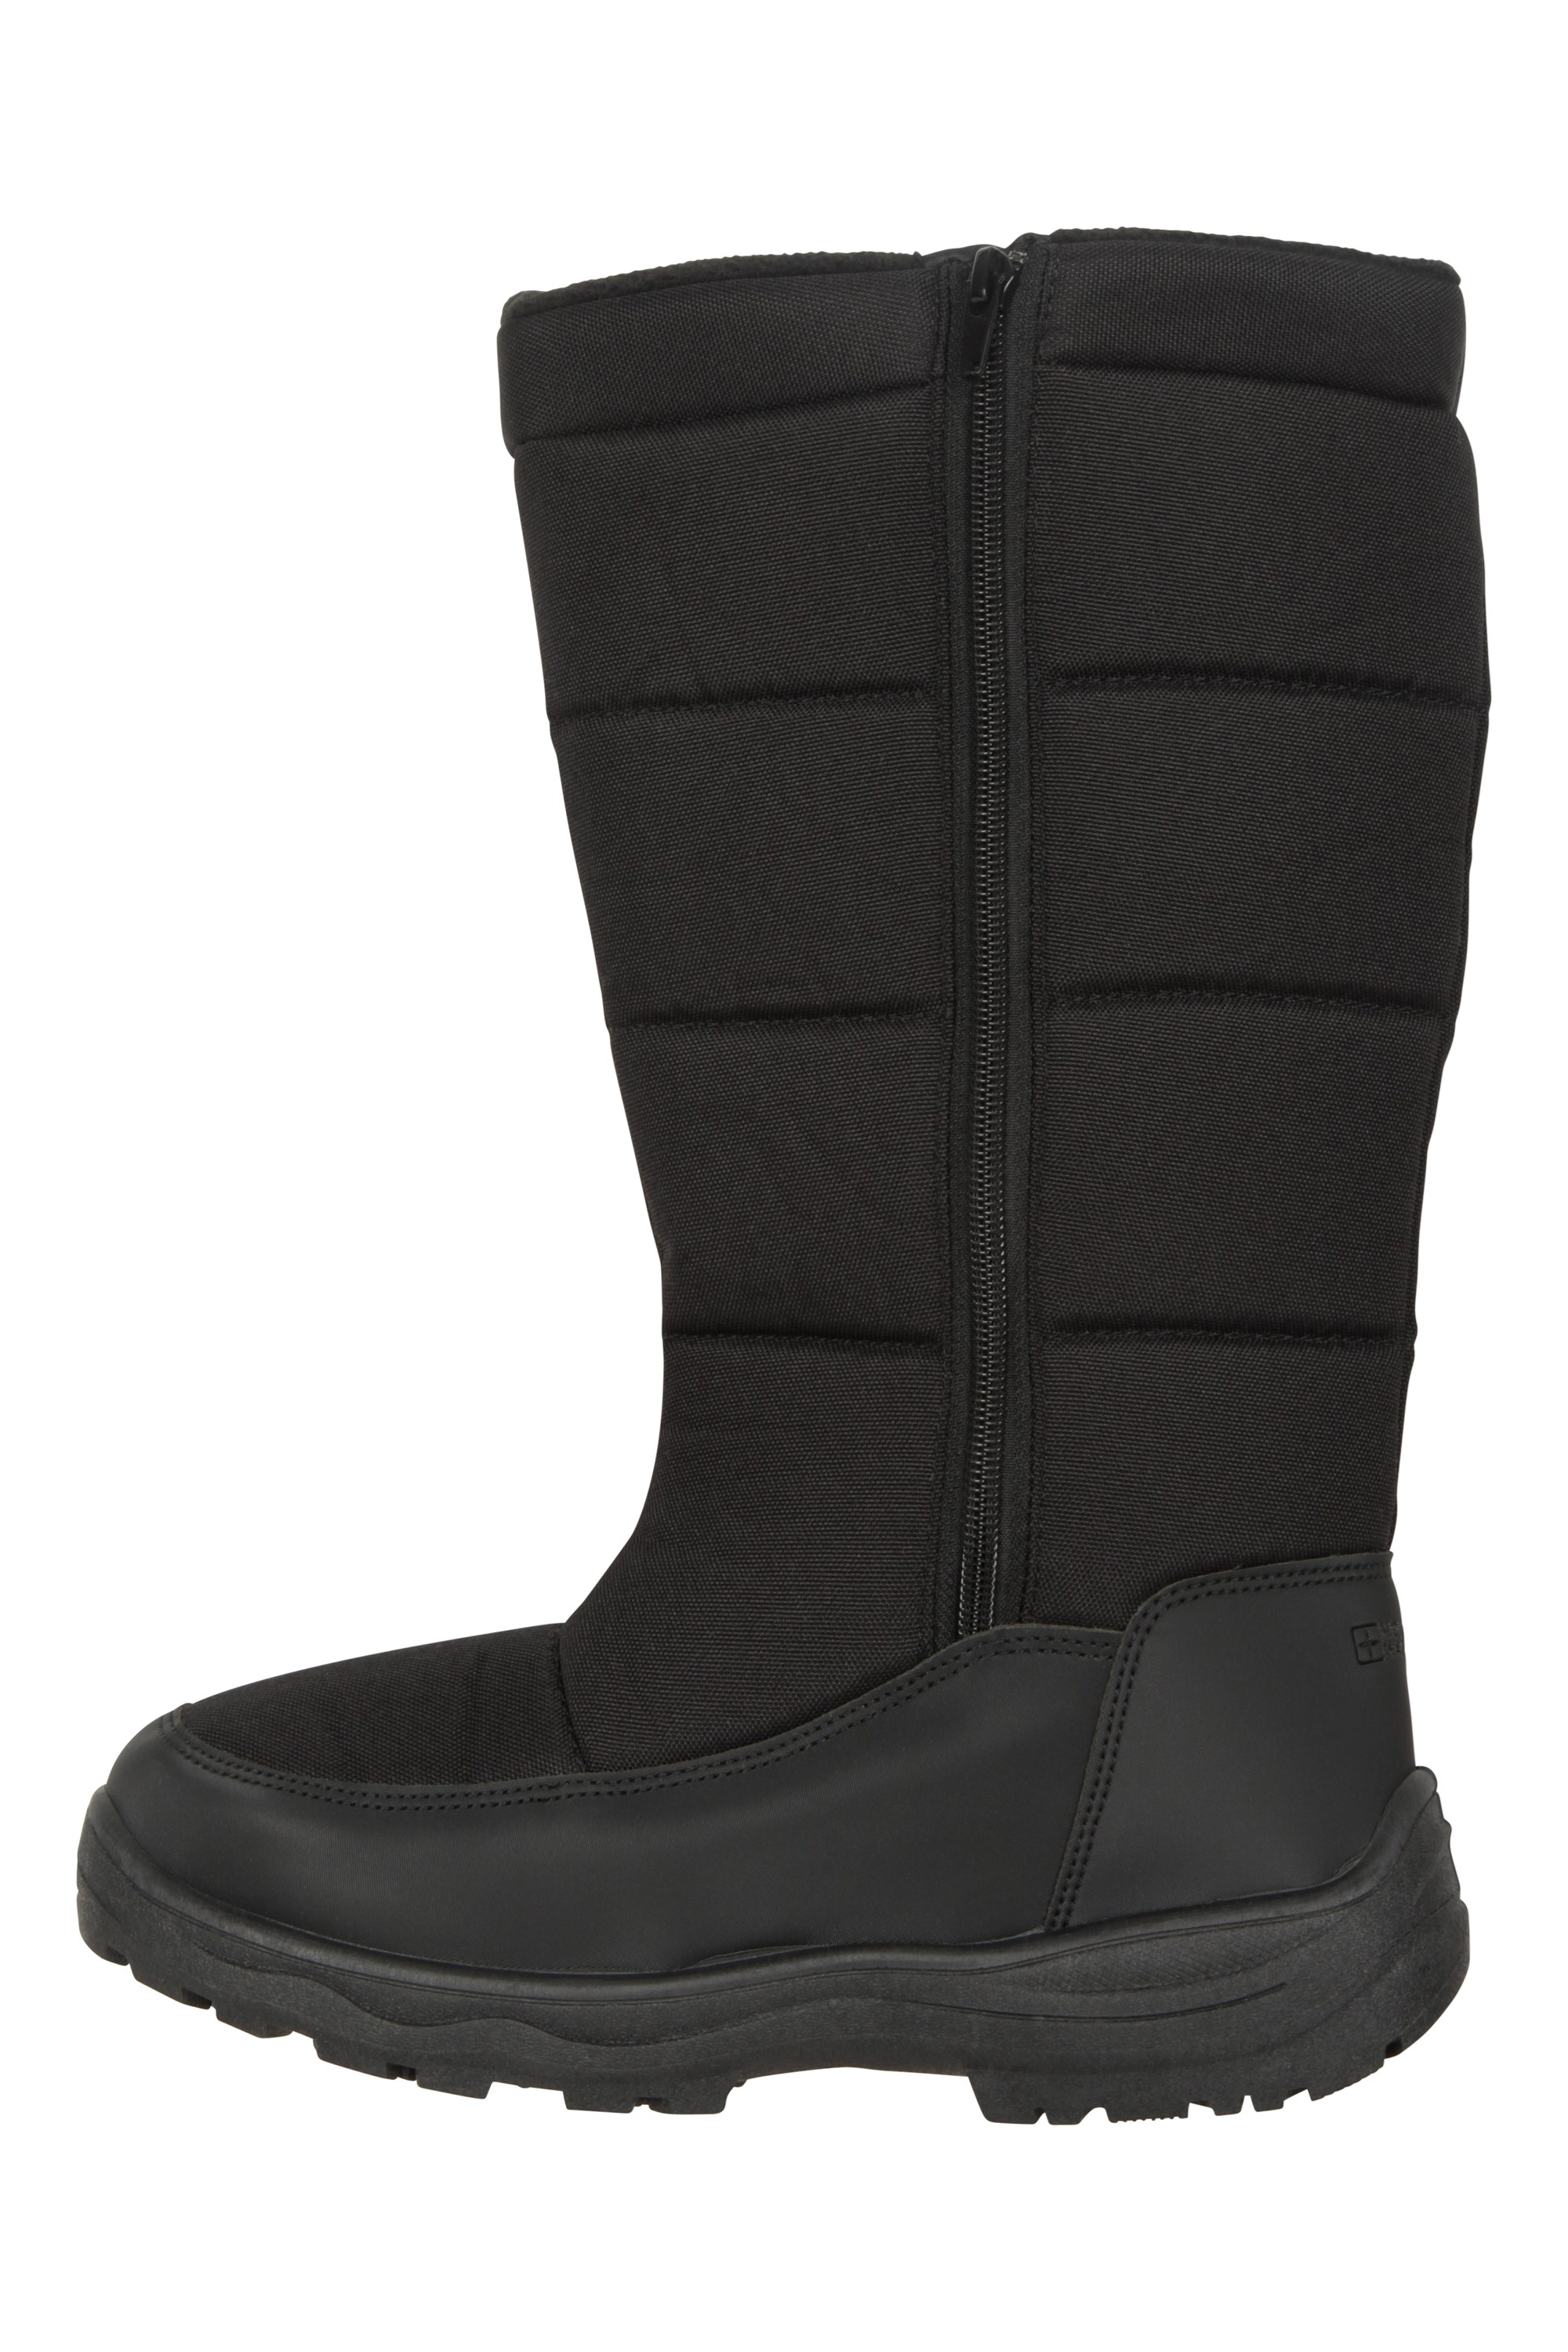 Icey Womens Long Snow Boots